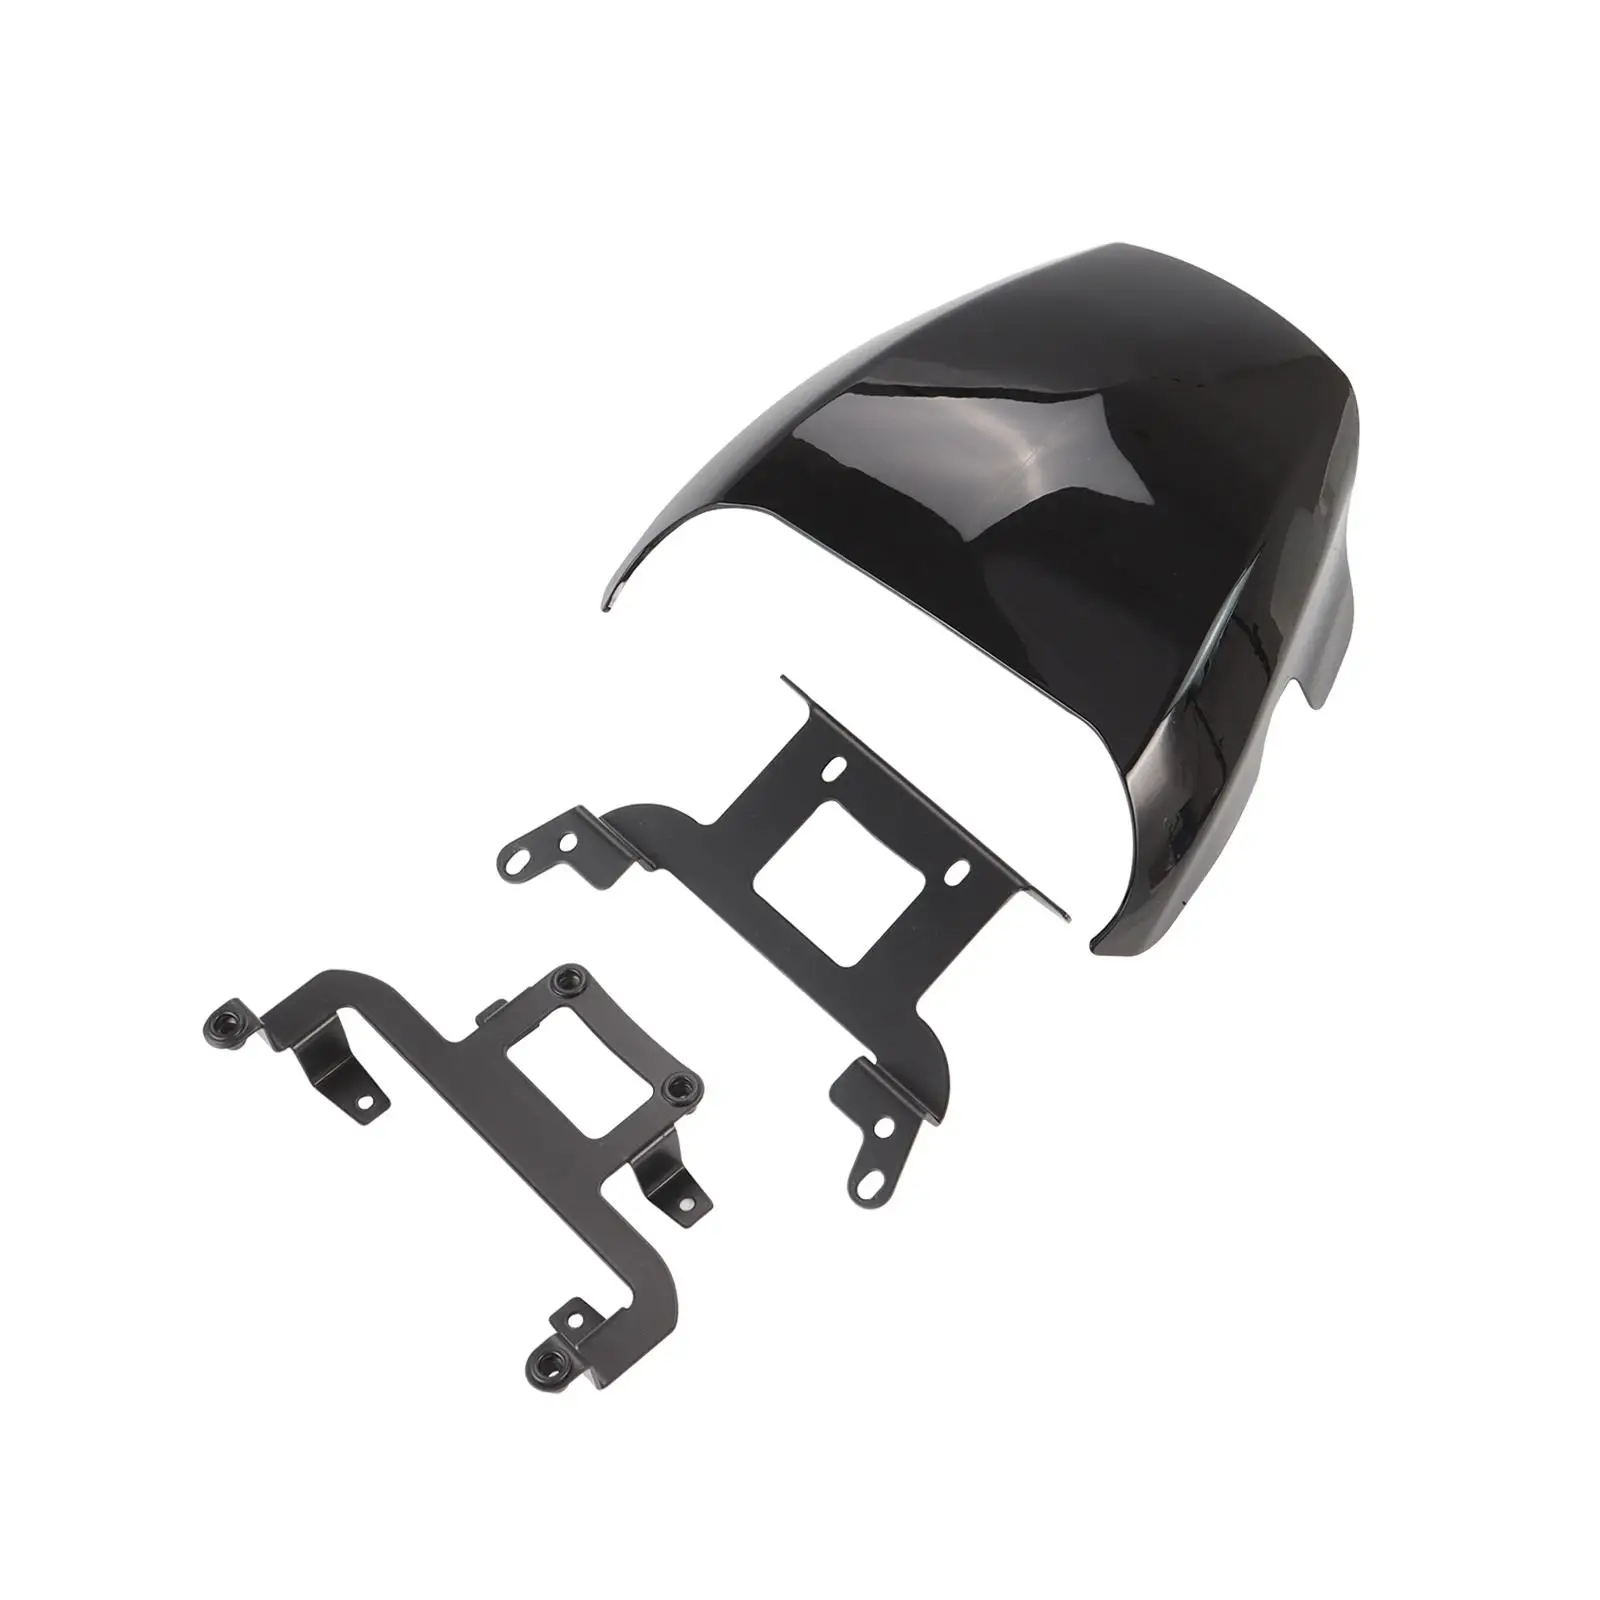 Motorcycle Front Headlight Fairing Cover Frame Protect Replace Parts Supplies Motorcycle Headlight Front Fairing for Rh1250